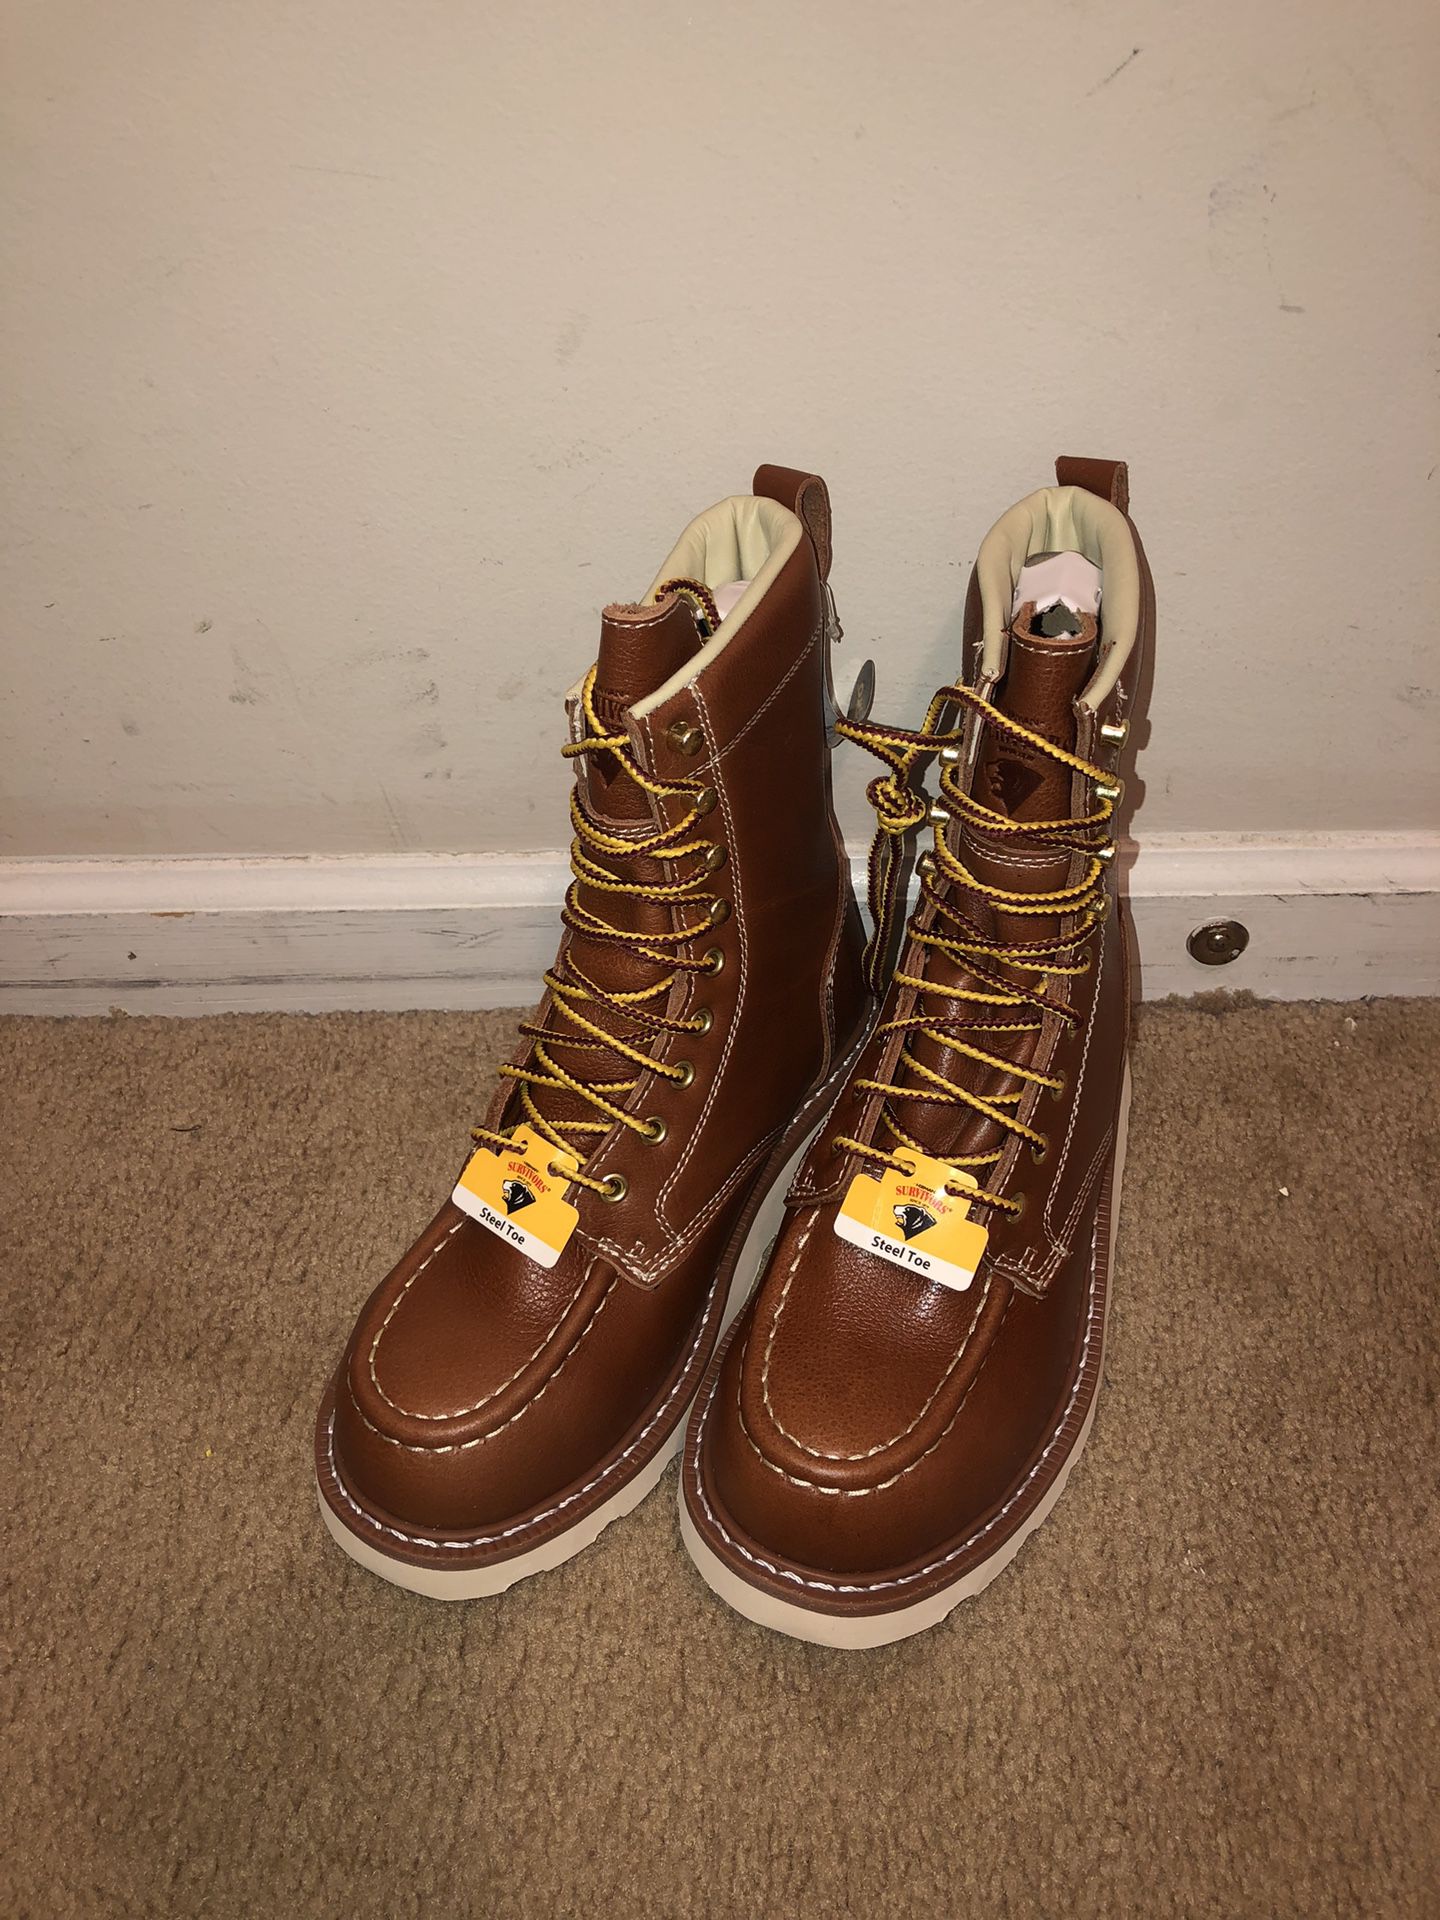 Men's work Boots 8" Steel Toe sizes 7/7.5/8/8.5/9/11 and 13